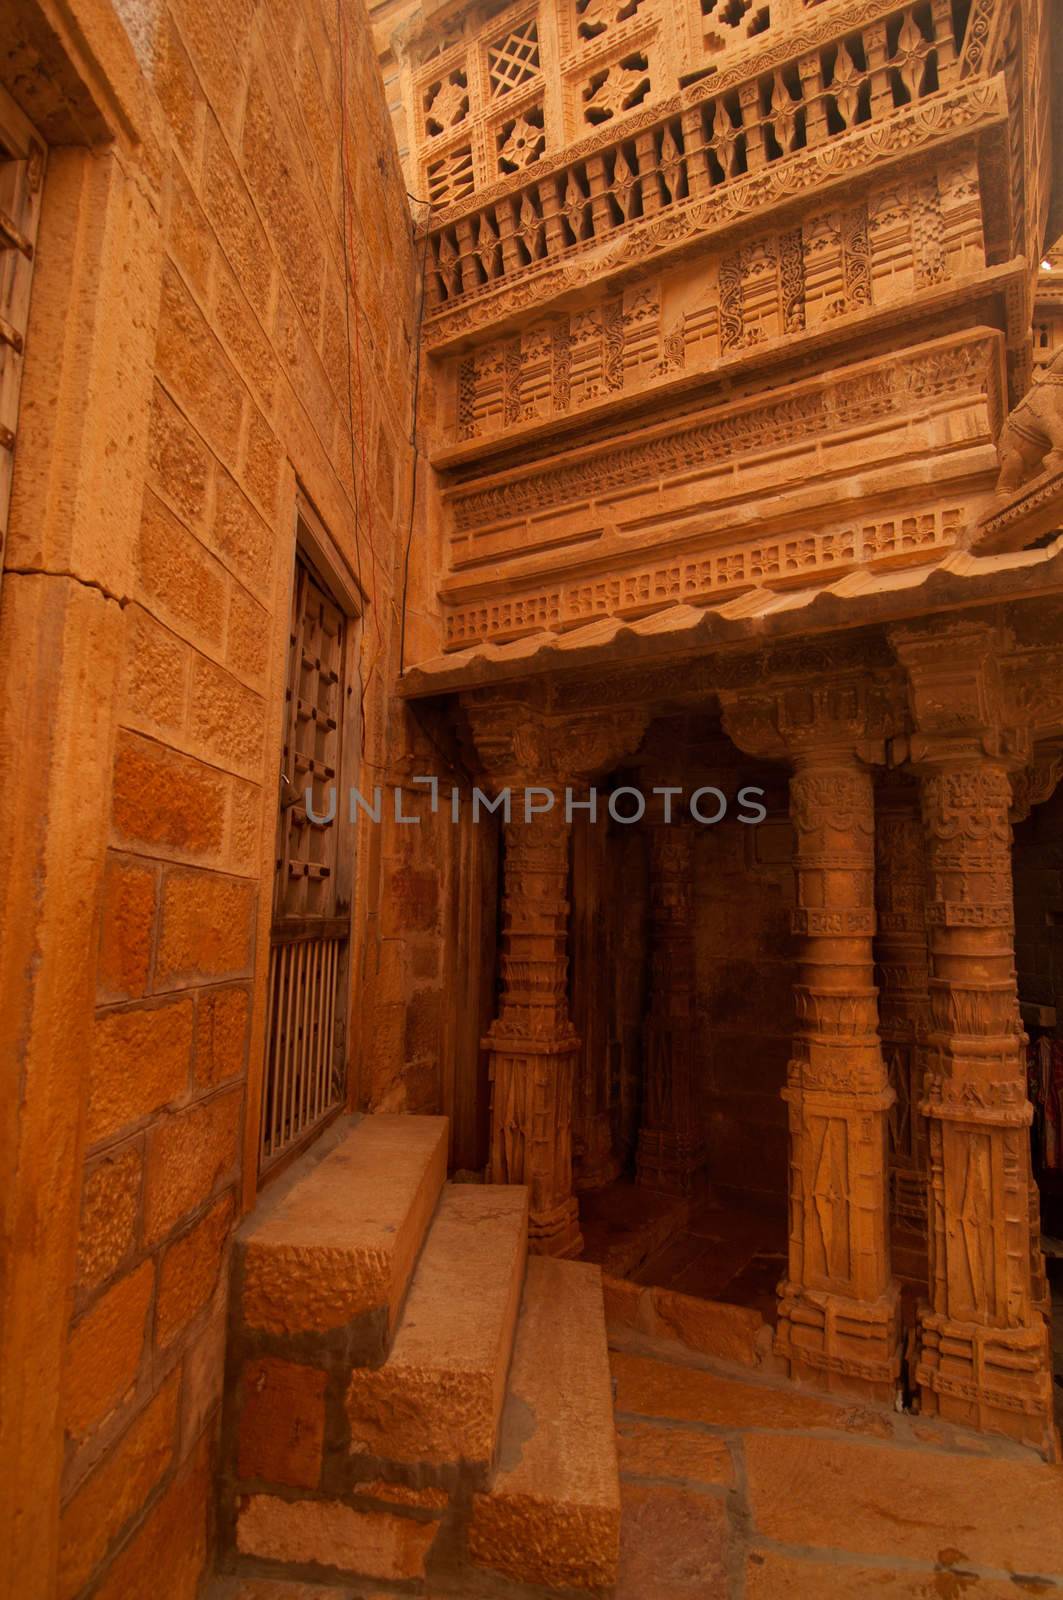 Carved walls and doors of Jaisalmer Fort, Rajasthan, India